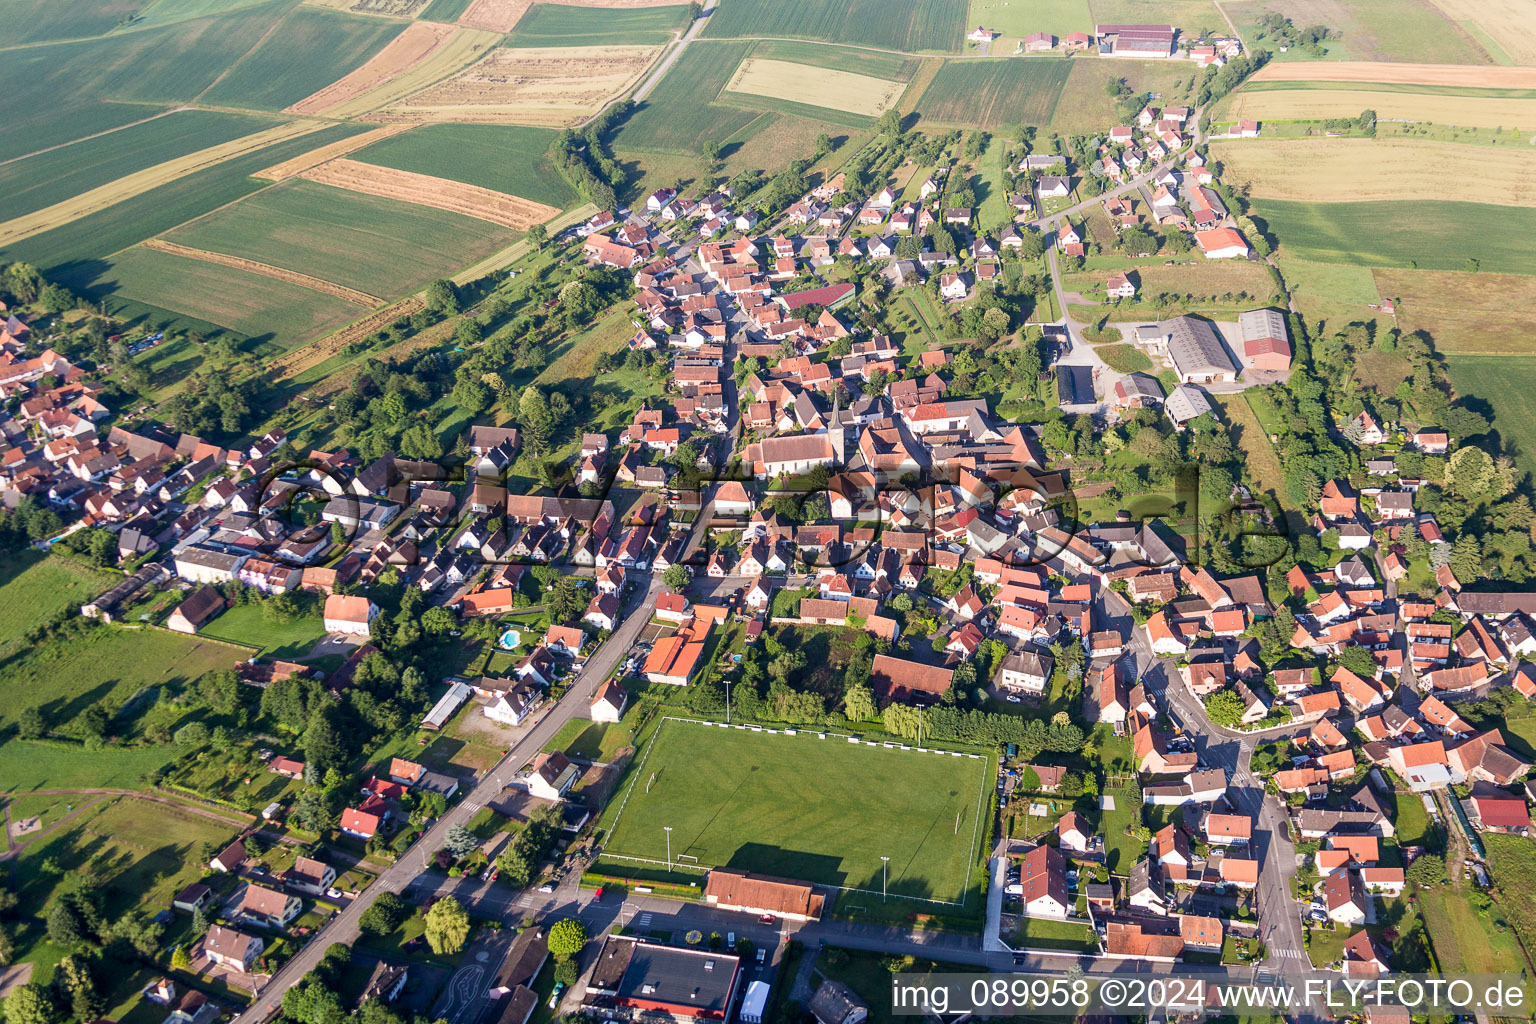 Aerial view of Village - view on the edge of agricultural fields and farmland in Riedseltz in Grand Est, France